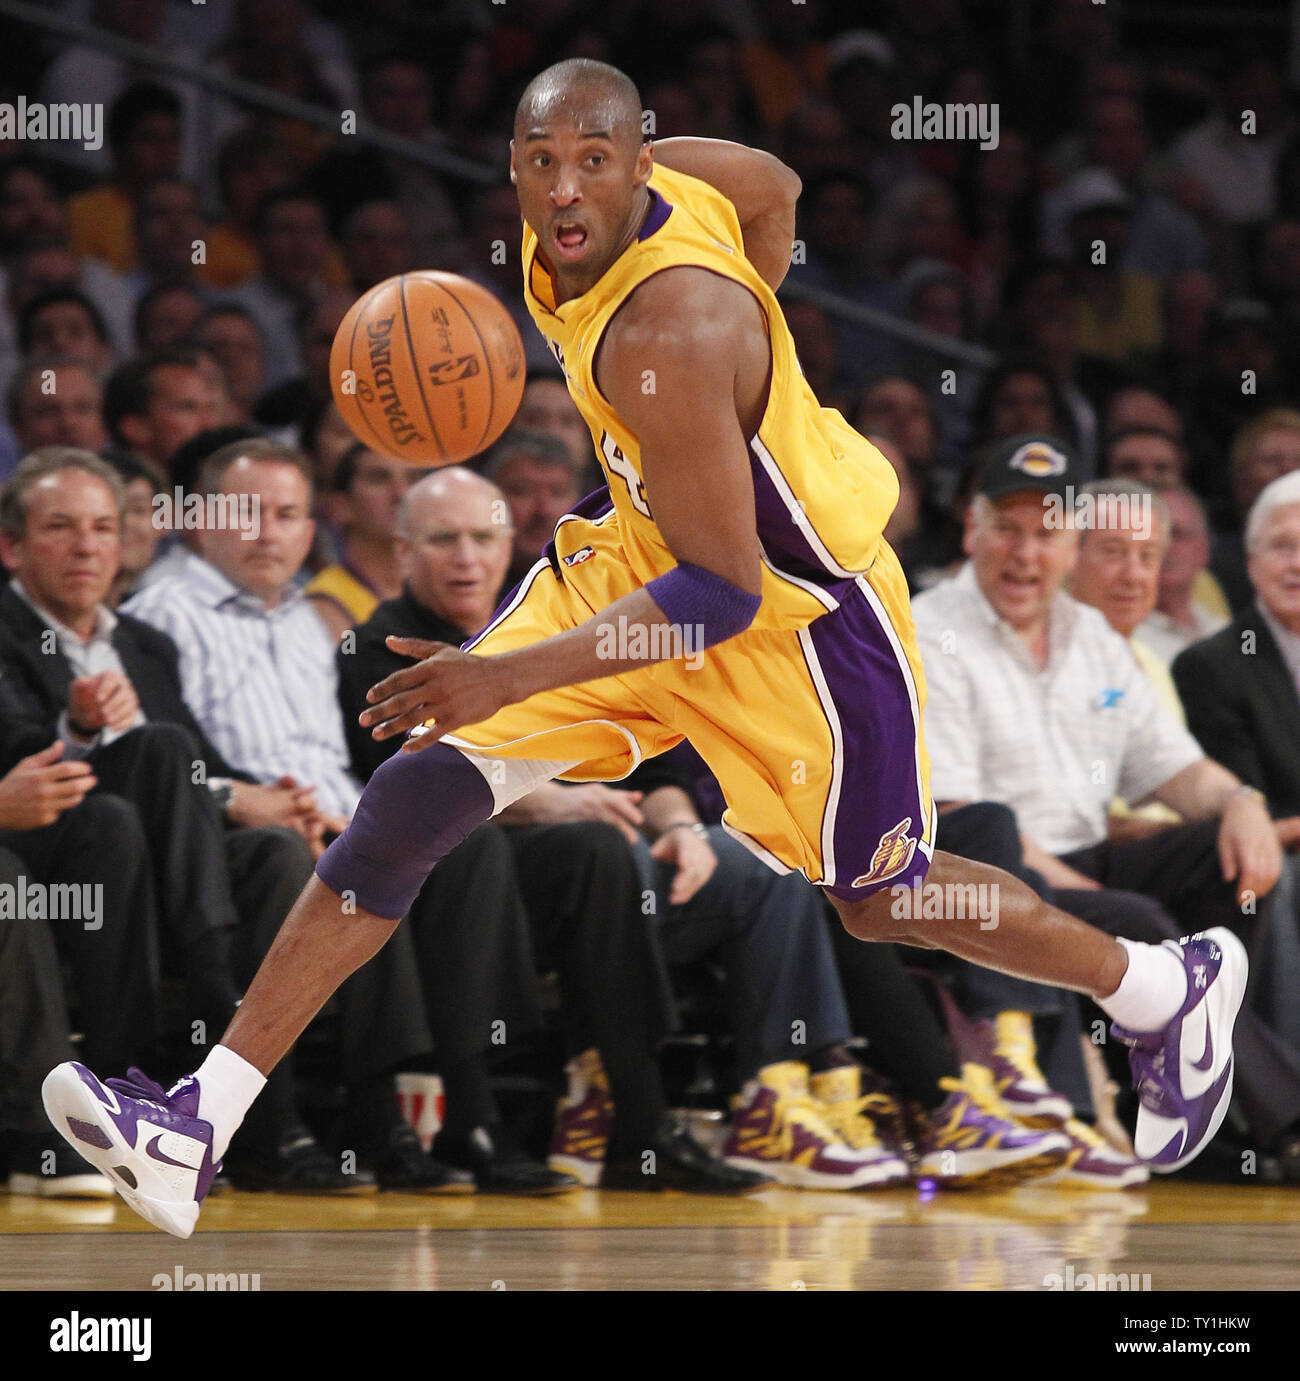 Los Angeles Lakers guard Kobe Bryant brings the ball up court against the Utah Jazz  during the first half of Game 2 of their Western Conference semifinal series at Staples Center in Los Angeles on May 4, 2010. The Lakers won 111-103 . UPI Photo/Lori Shepler Stock Photo